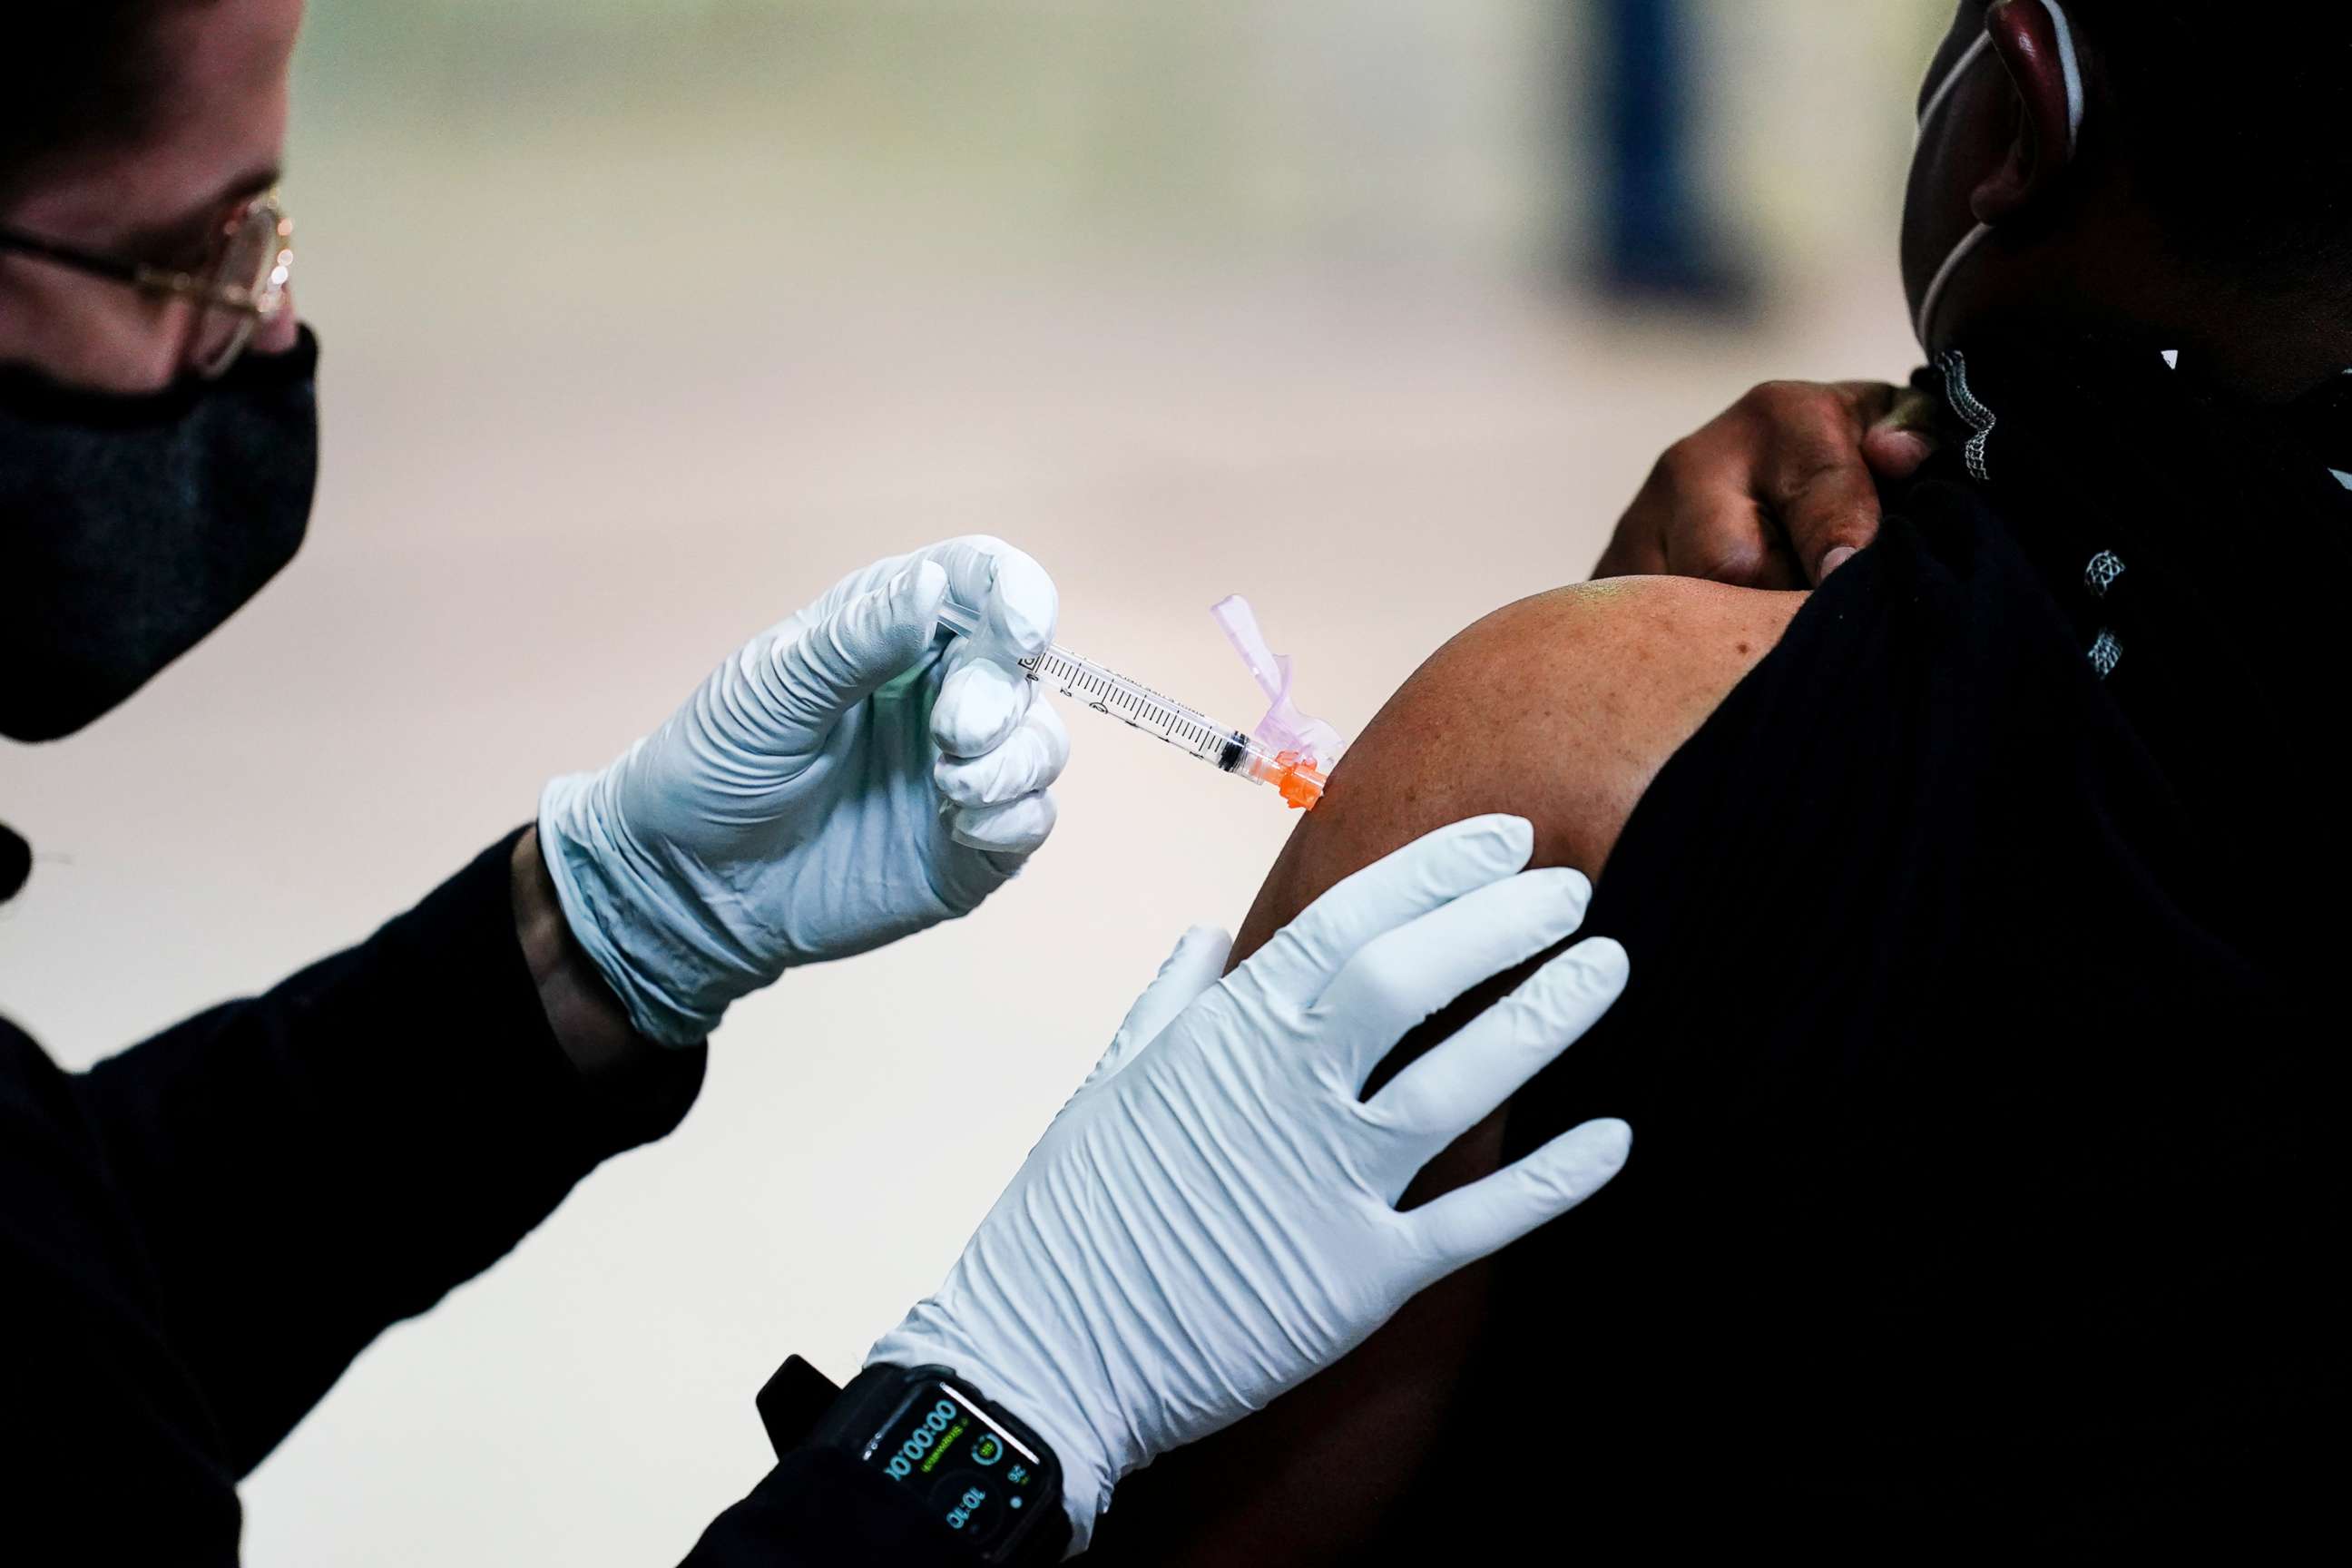 PHOTO: In this March 26, 2021, file photo, a member of the Philadelphia Fire Department administers the Johnson & Johnson COVID-19 vaccine to a person at a vaccination site at a Salvation Army location in Philadelphia.